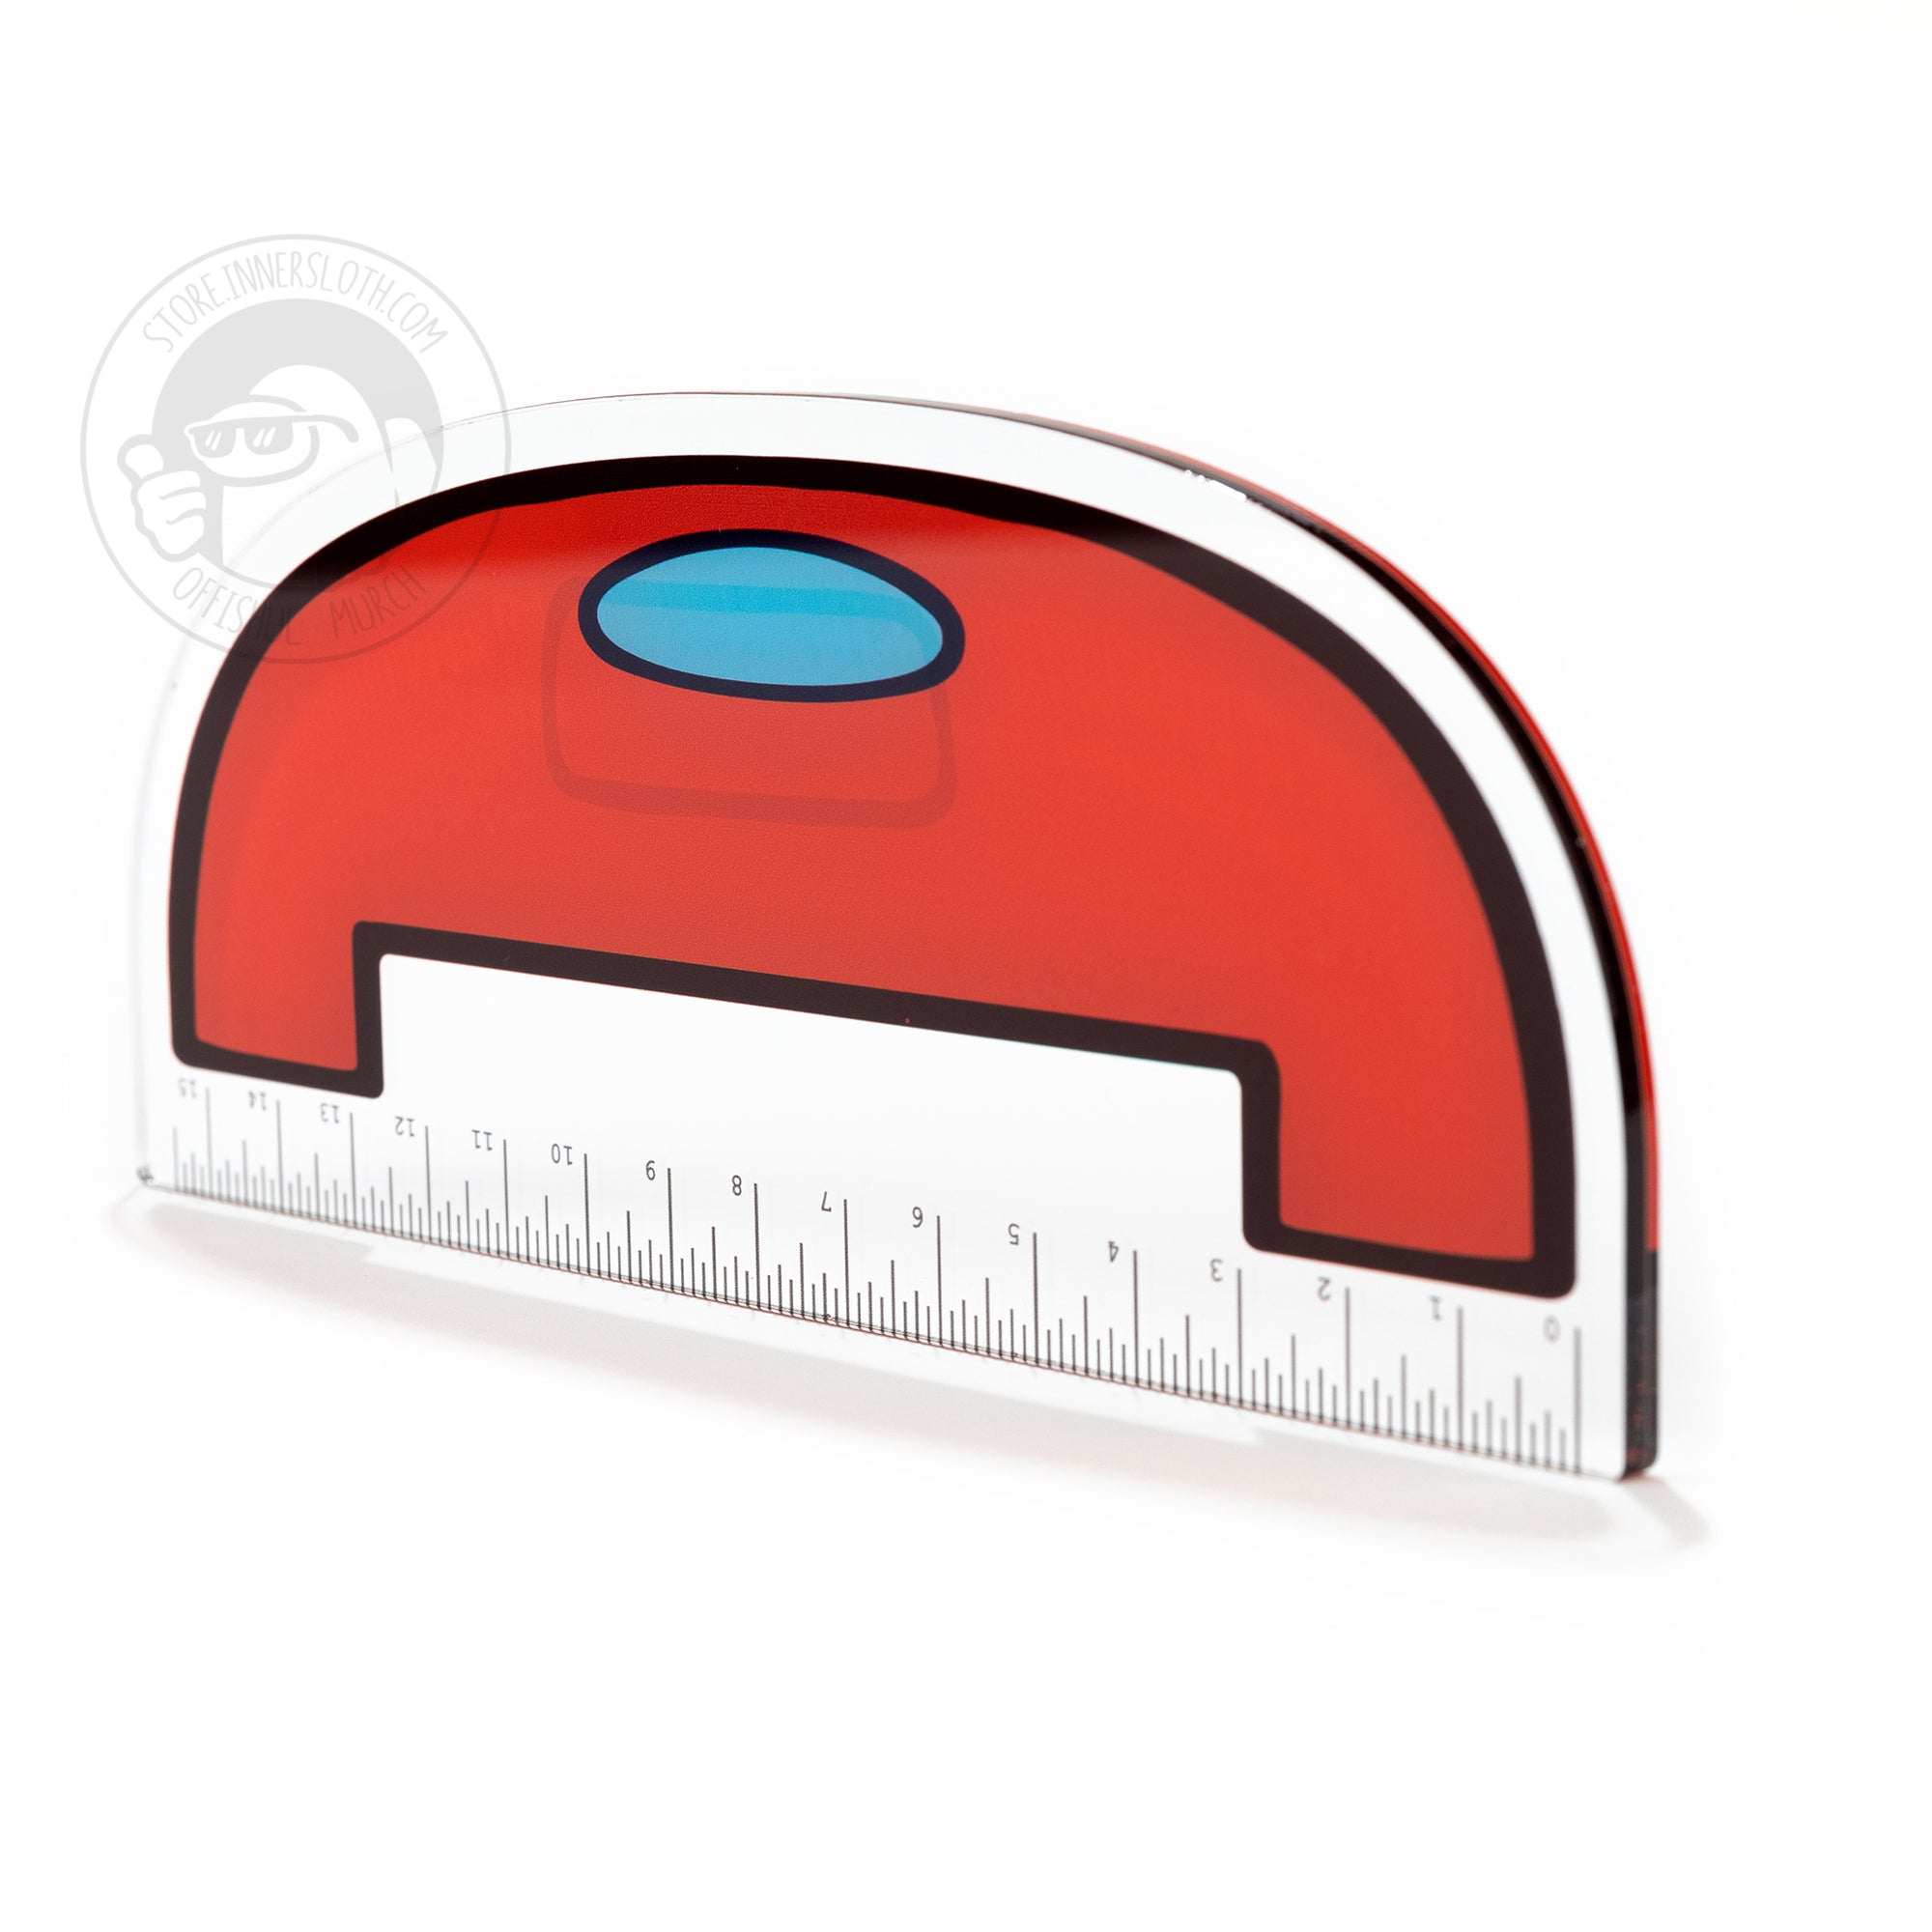 A product photo of the front of an acrylic ruler that is shaped like a long semi-circle. The straight edge includes measurements in inches. Above the measurements stands a simplified, wide red crewmate with a blue visor. 